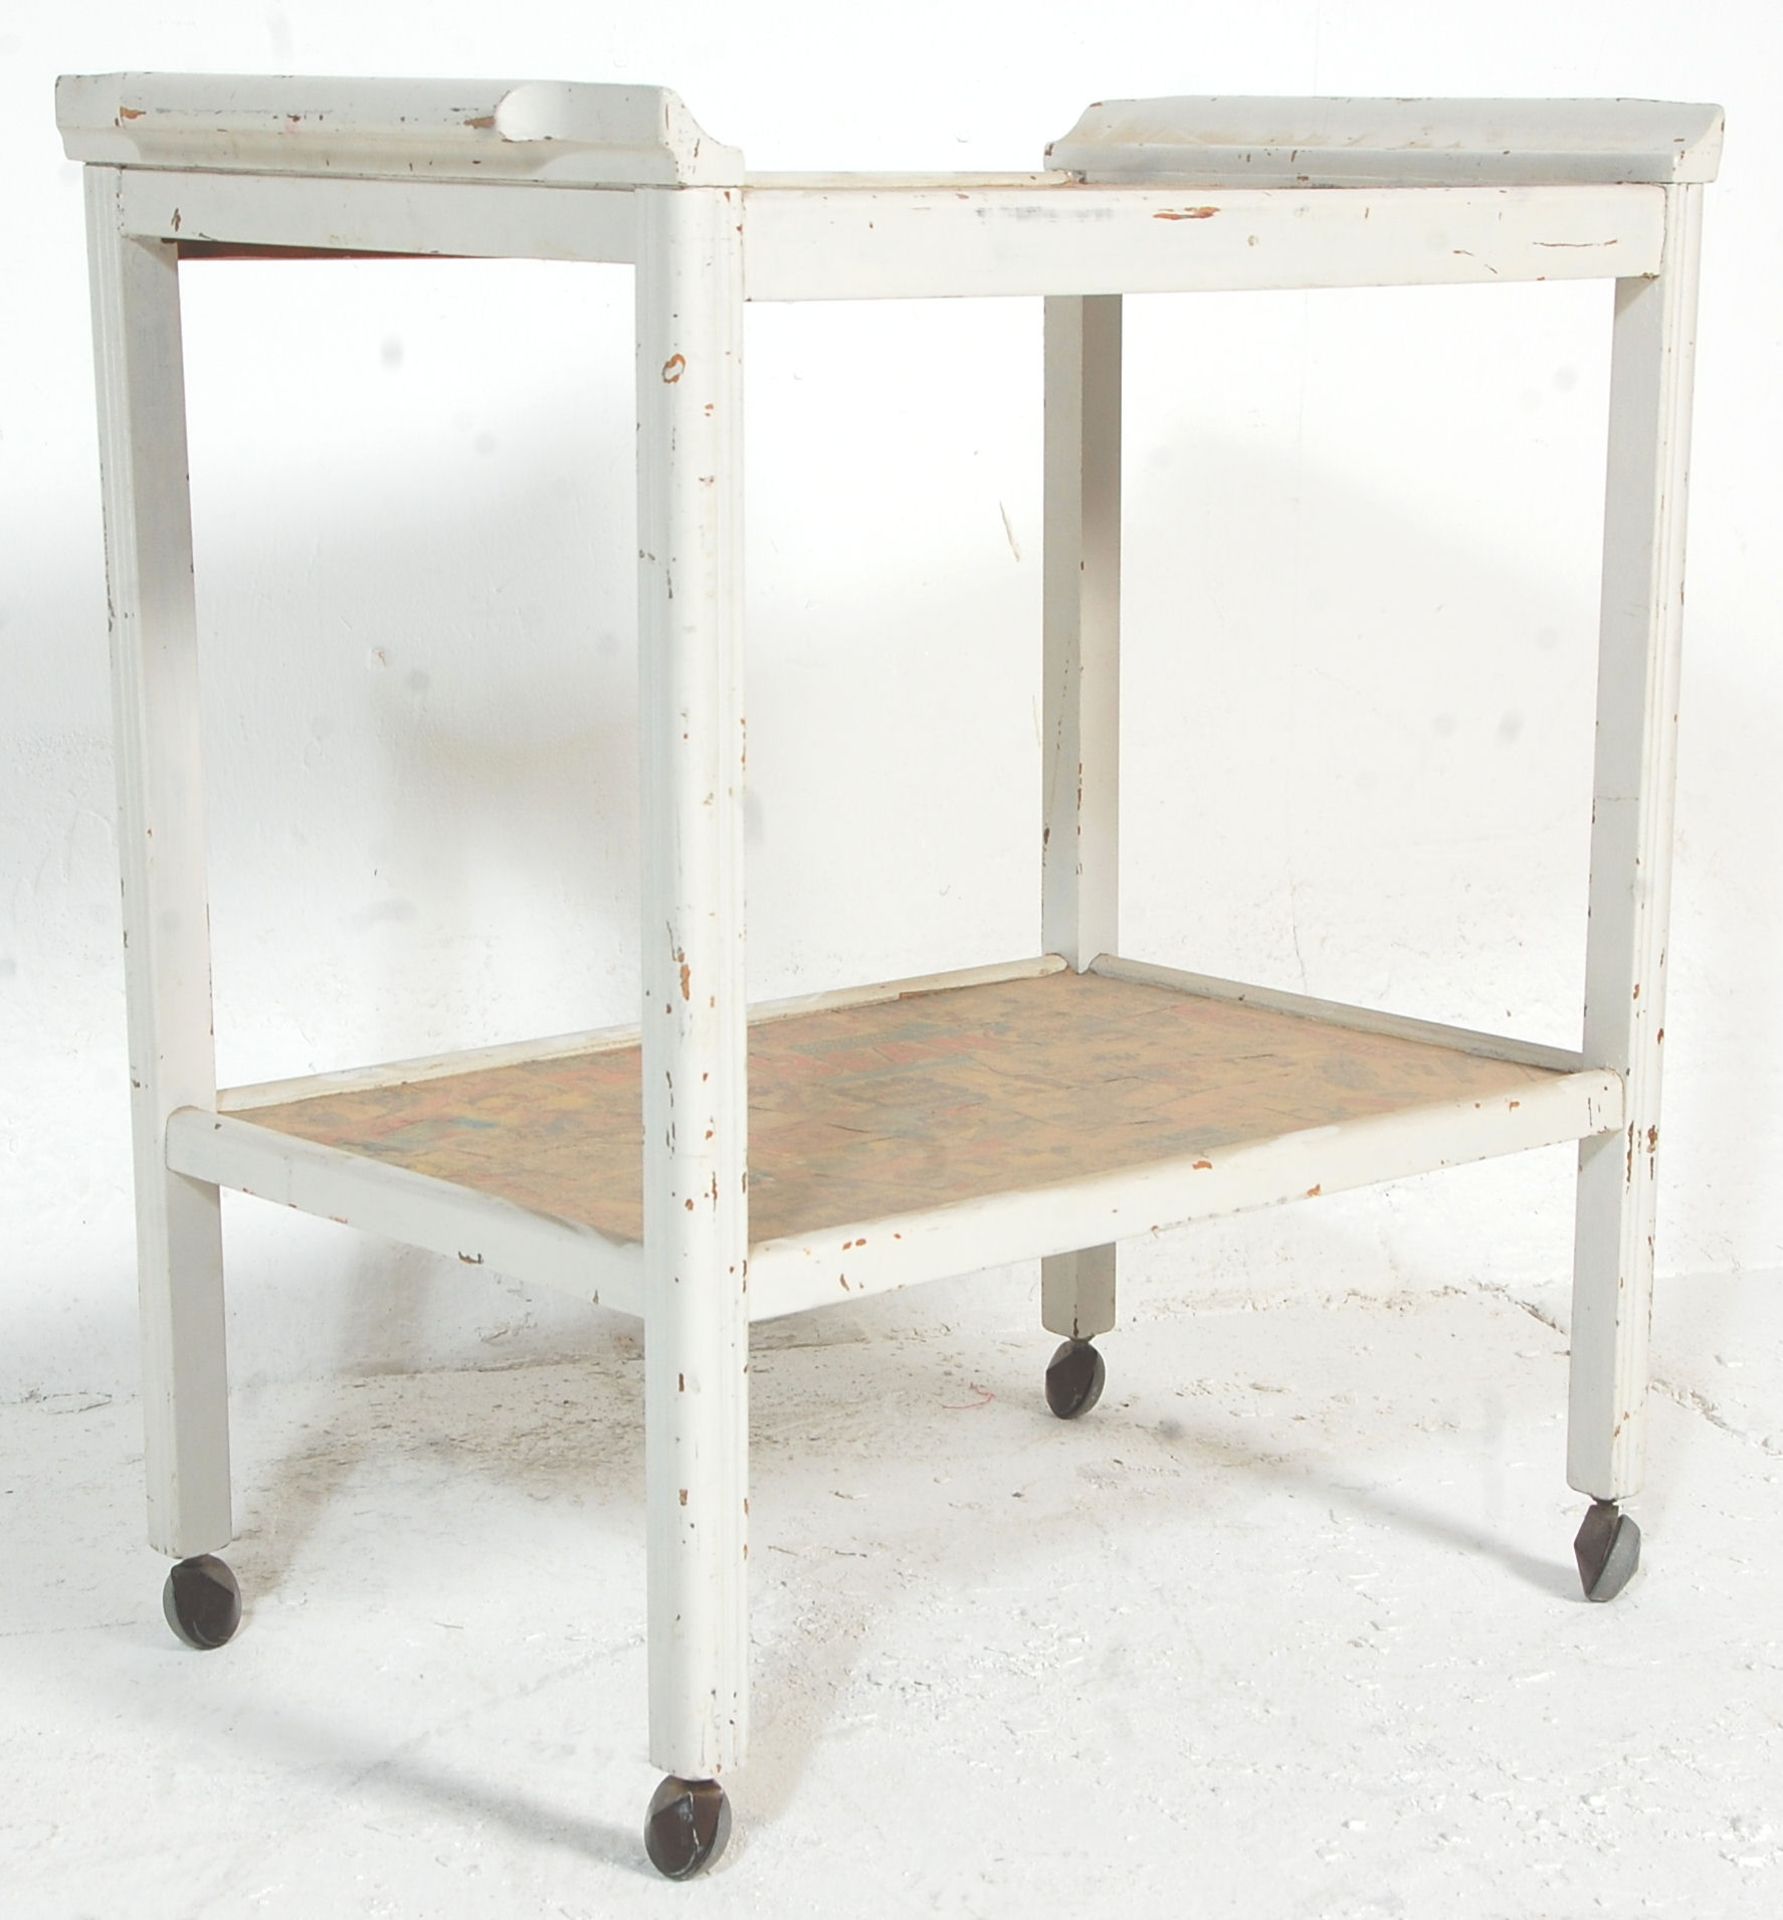 An early 20th century century shabby chic painted